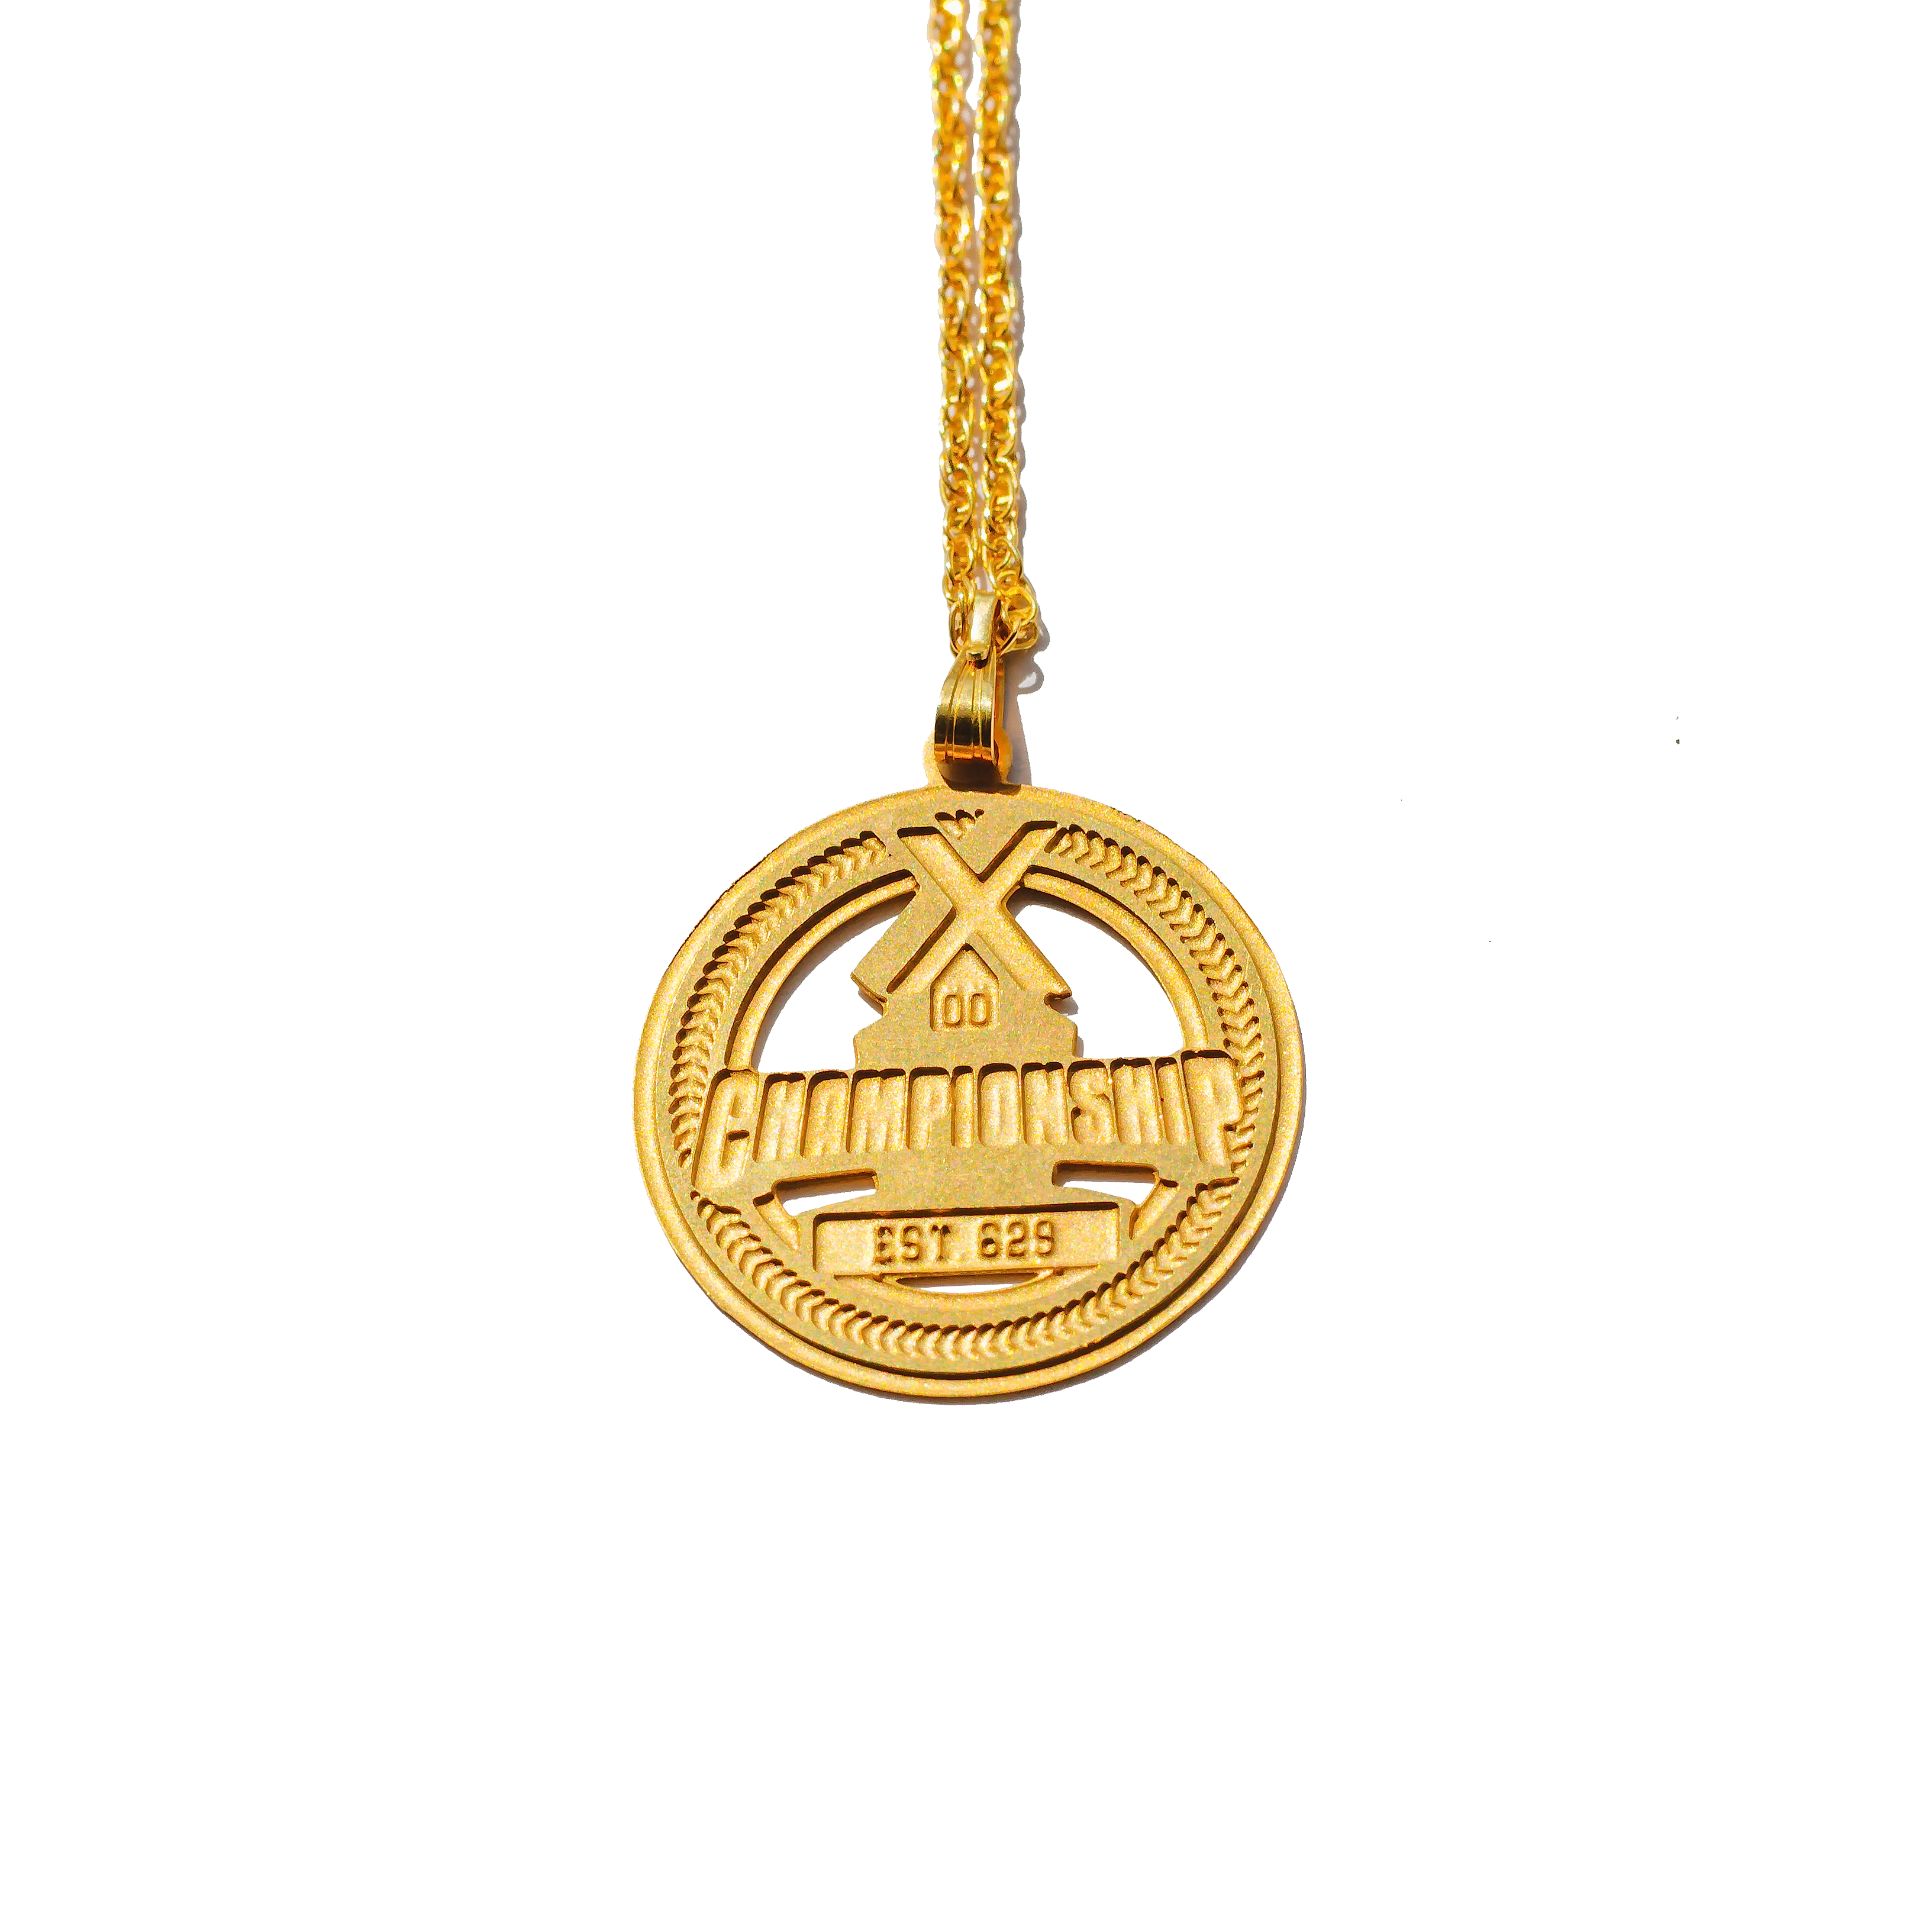 CHAMPIONSHIP Medallion Necklace - Silver